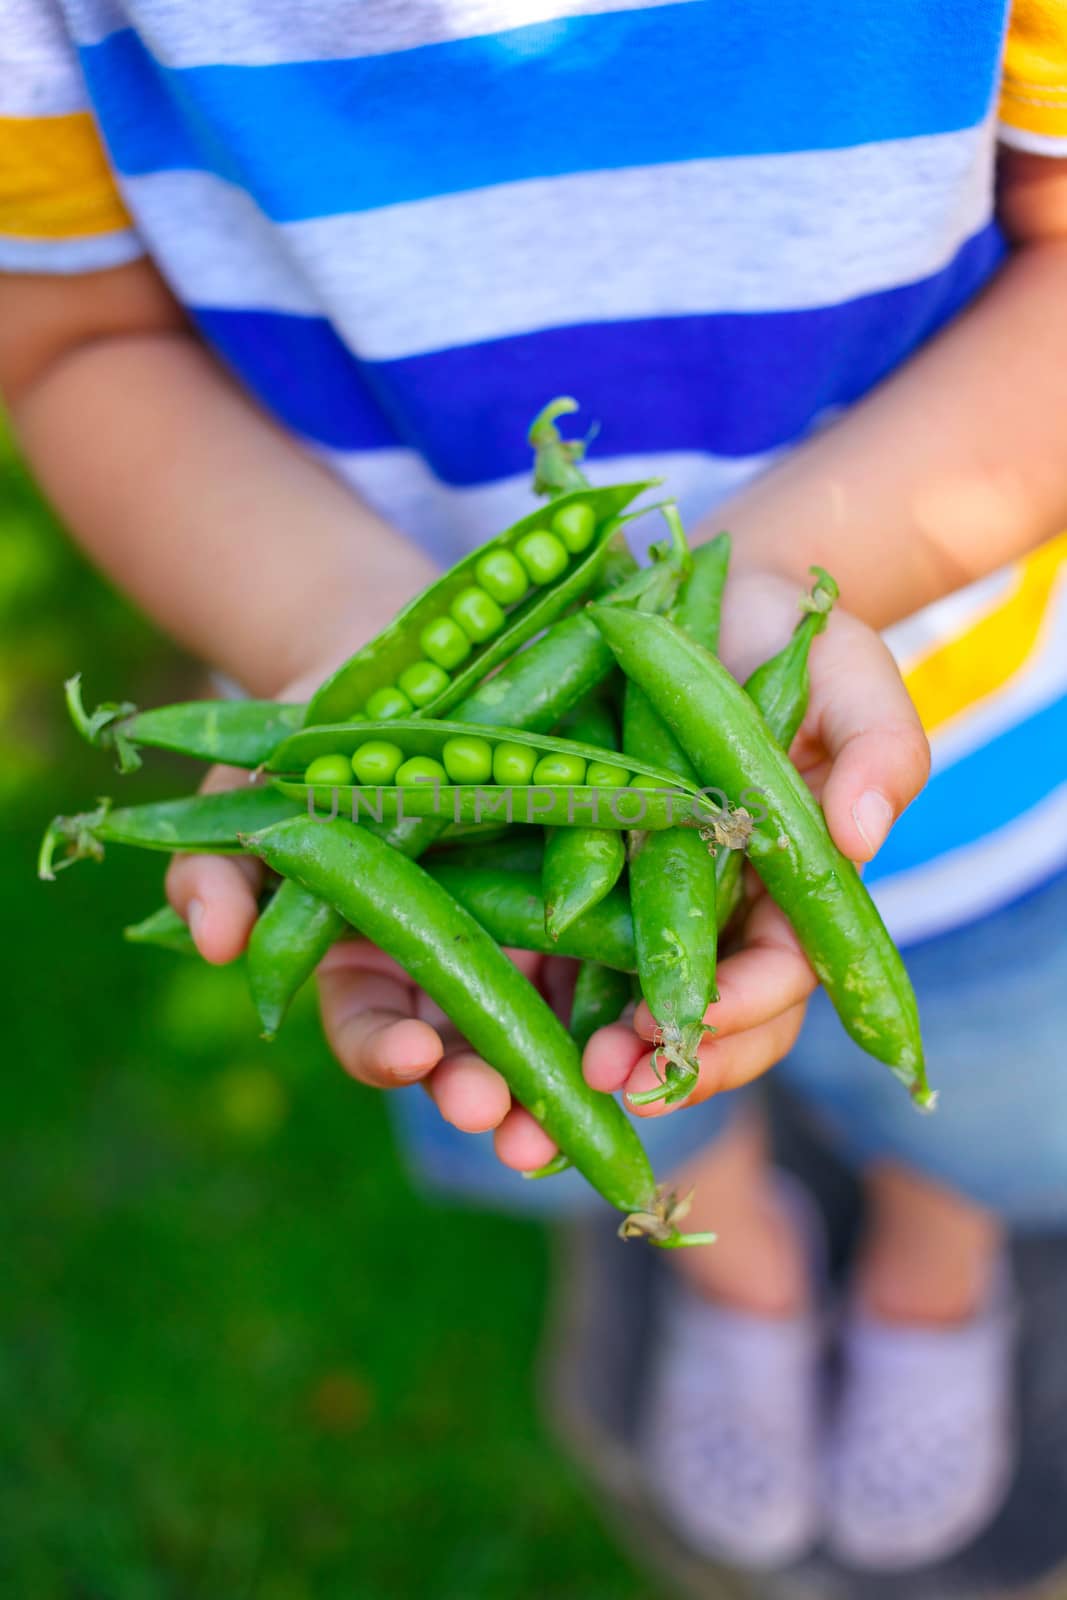 Young boy hand holding organic green natural healthy food produce green Peas